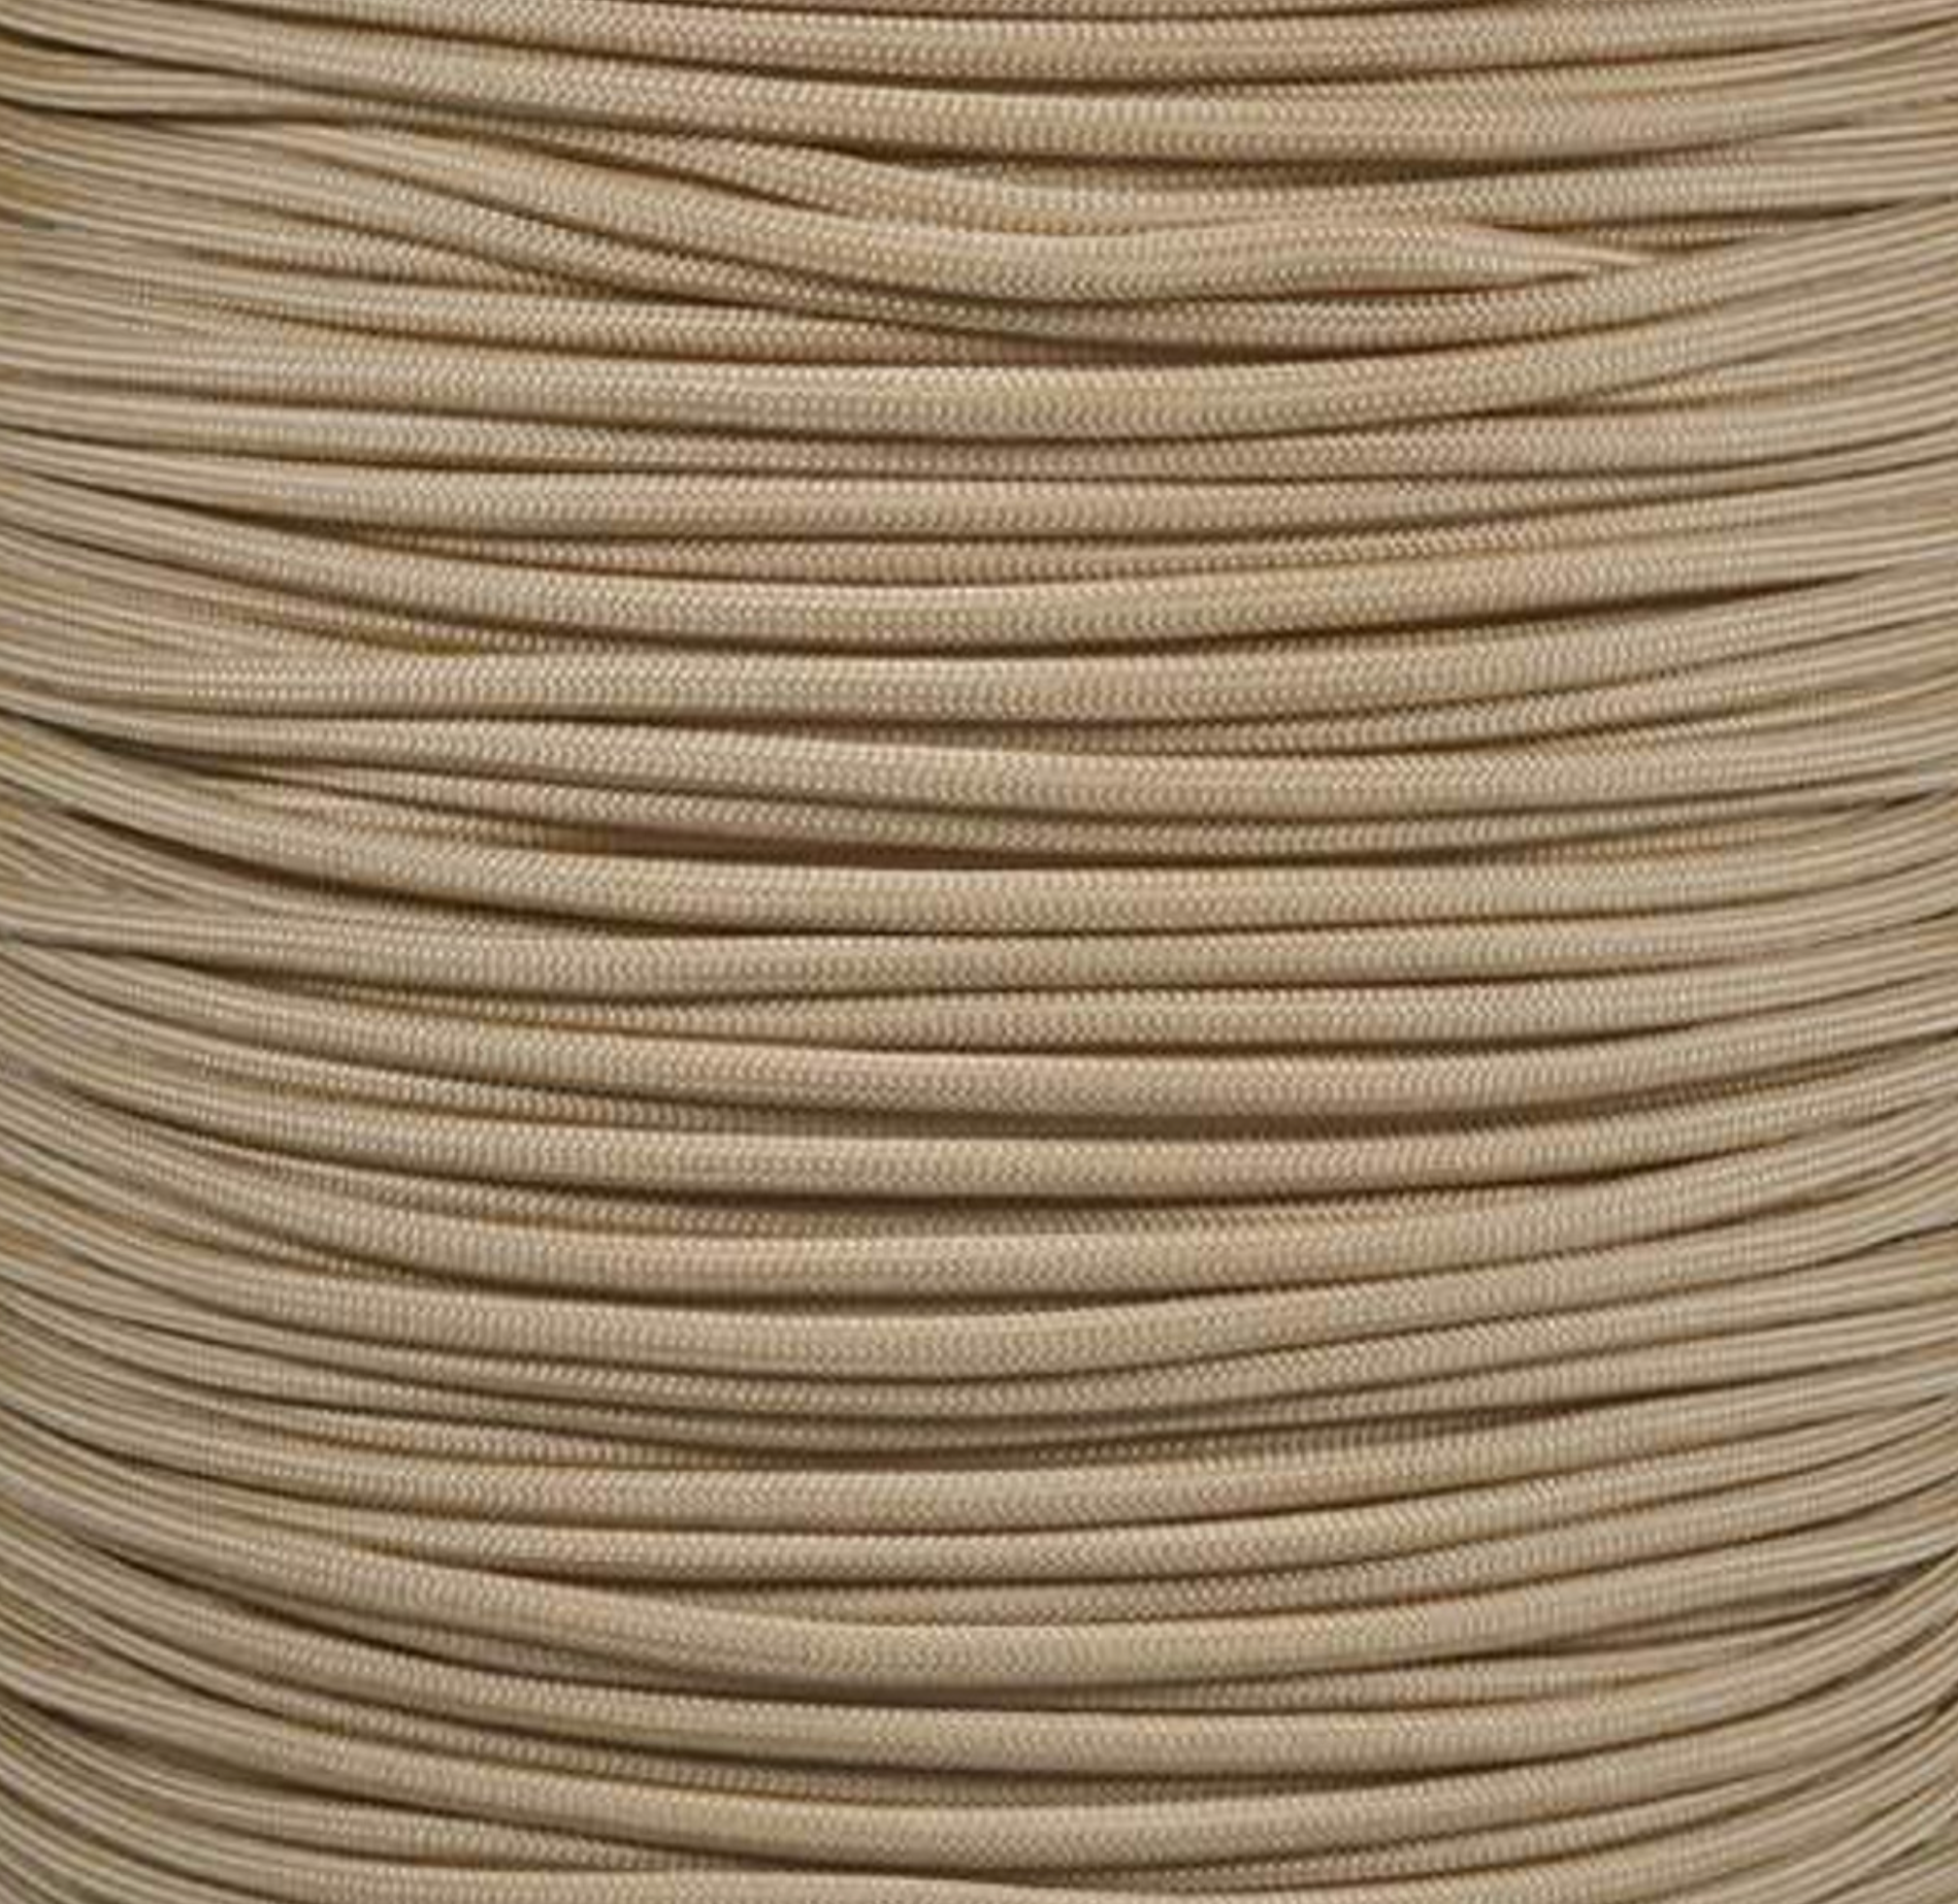 550 Paracord Made in the U.S.A. (Tan) 100 Ft.